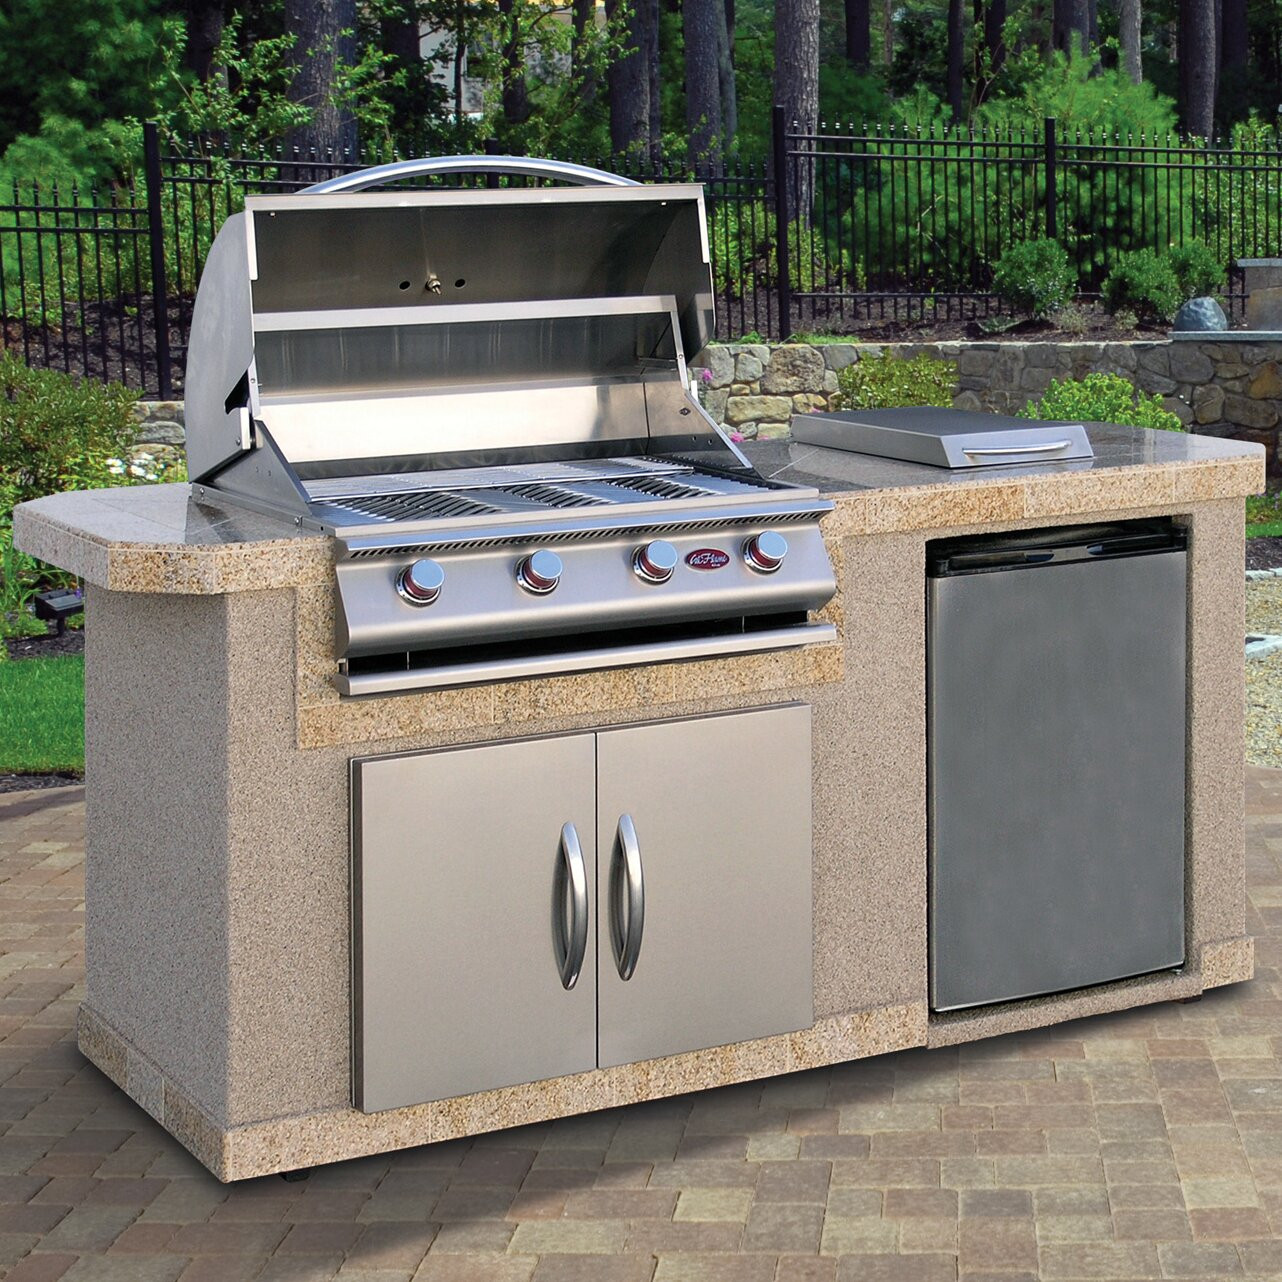 Gas Grill For Outdoor Kitchen
 CalFlame Outdoor Kitchen Islands 4 Burner Built In Propane